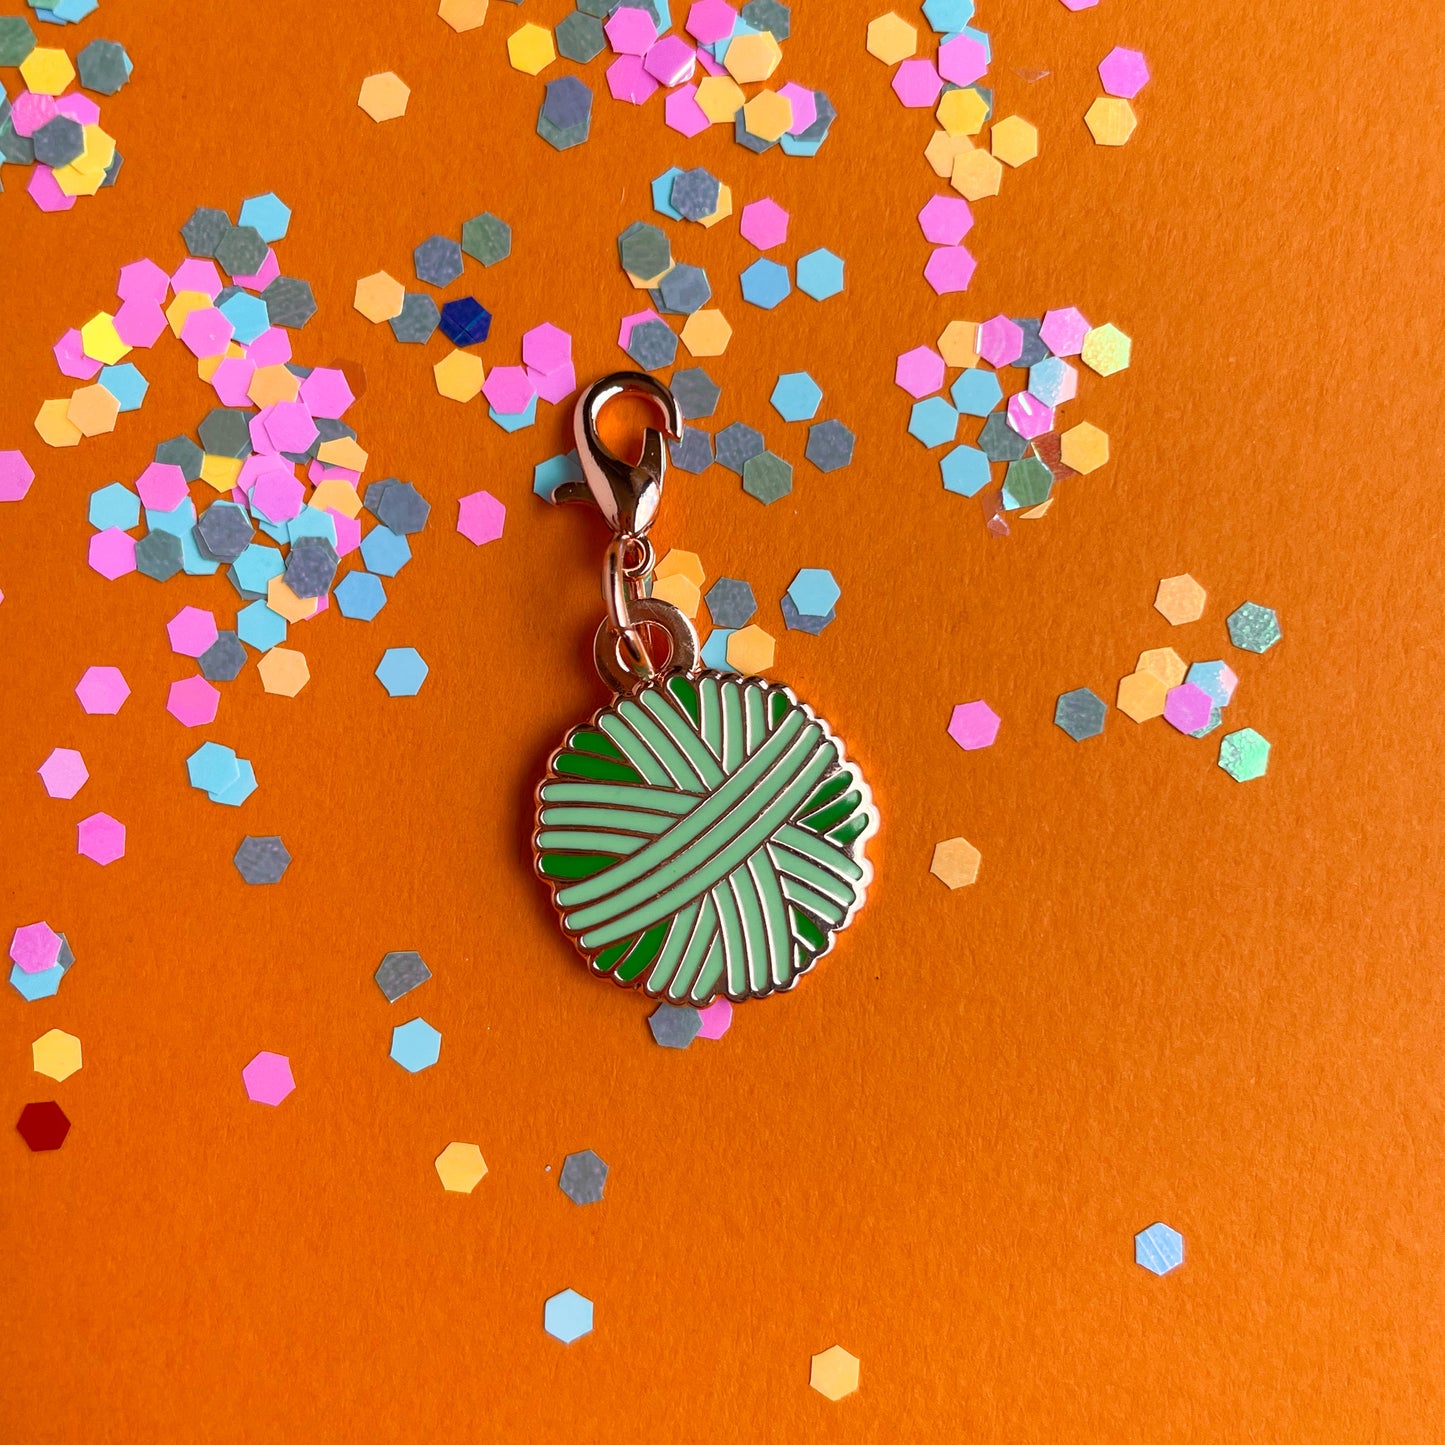 A mint green yarn ball charm on an orange background covered in confetti